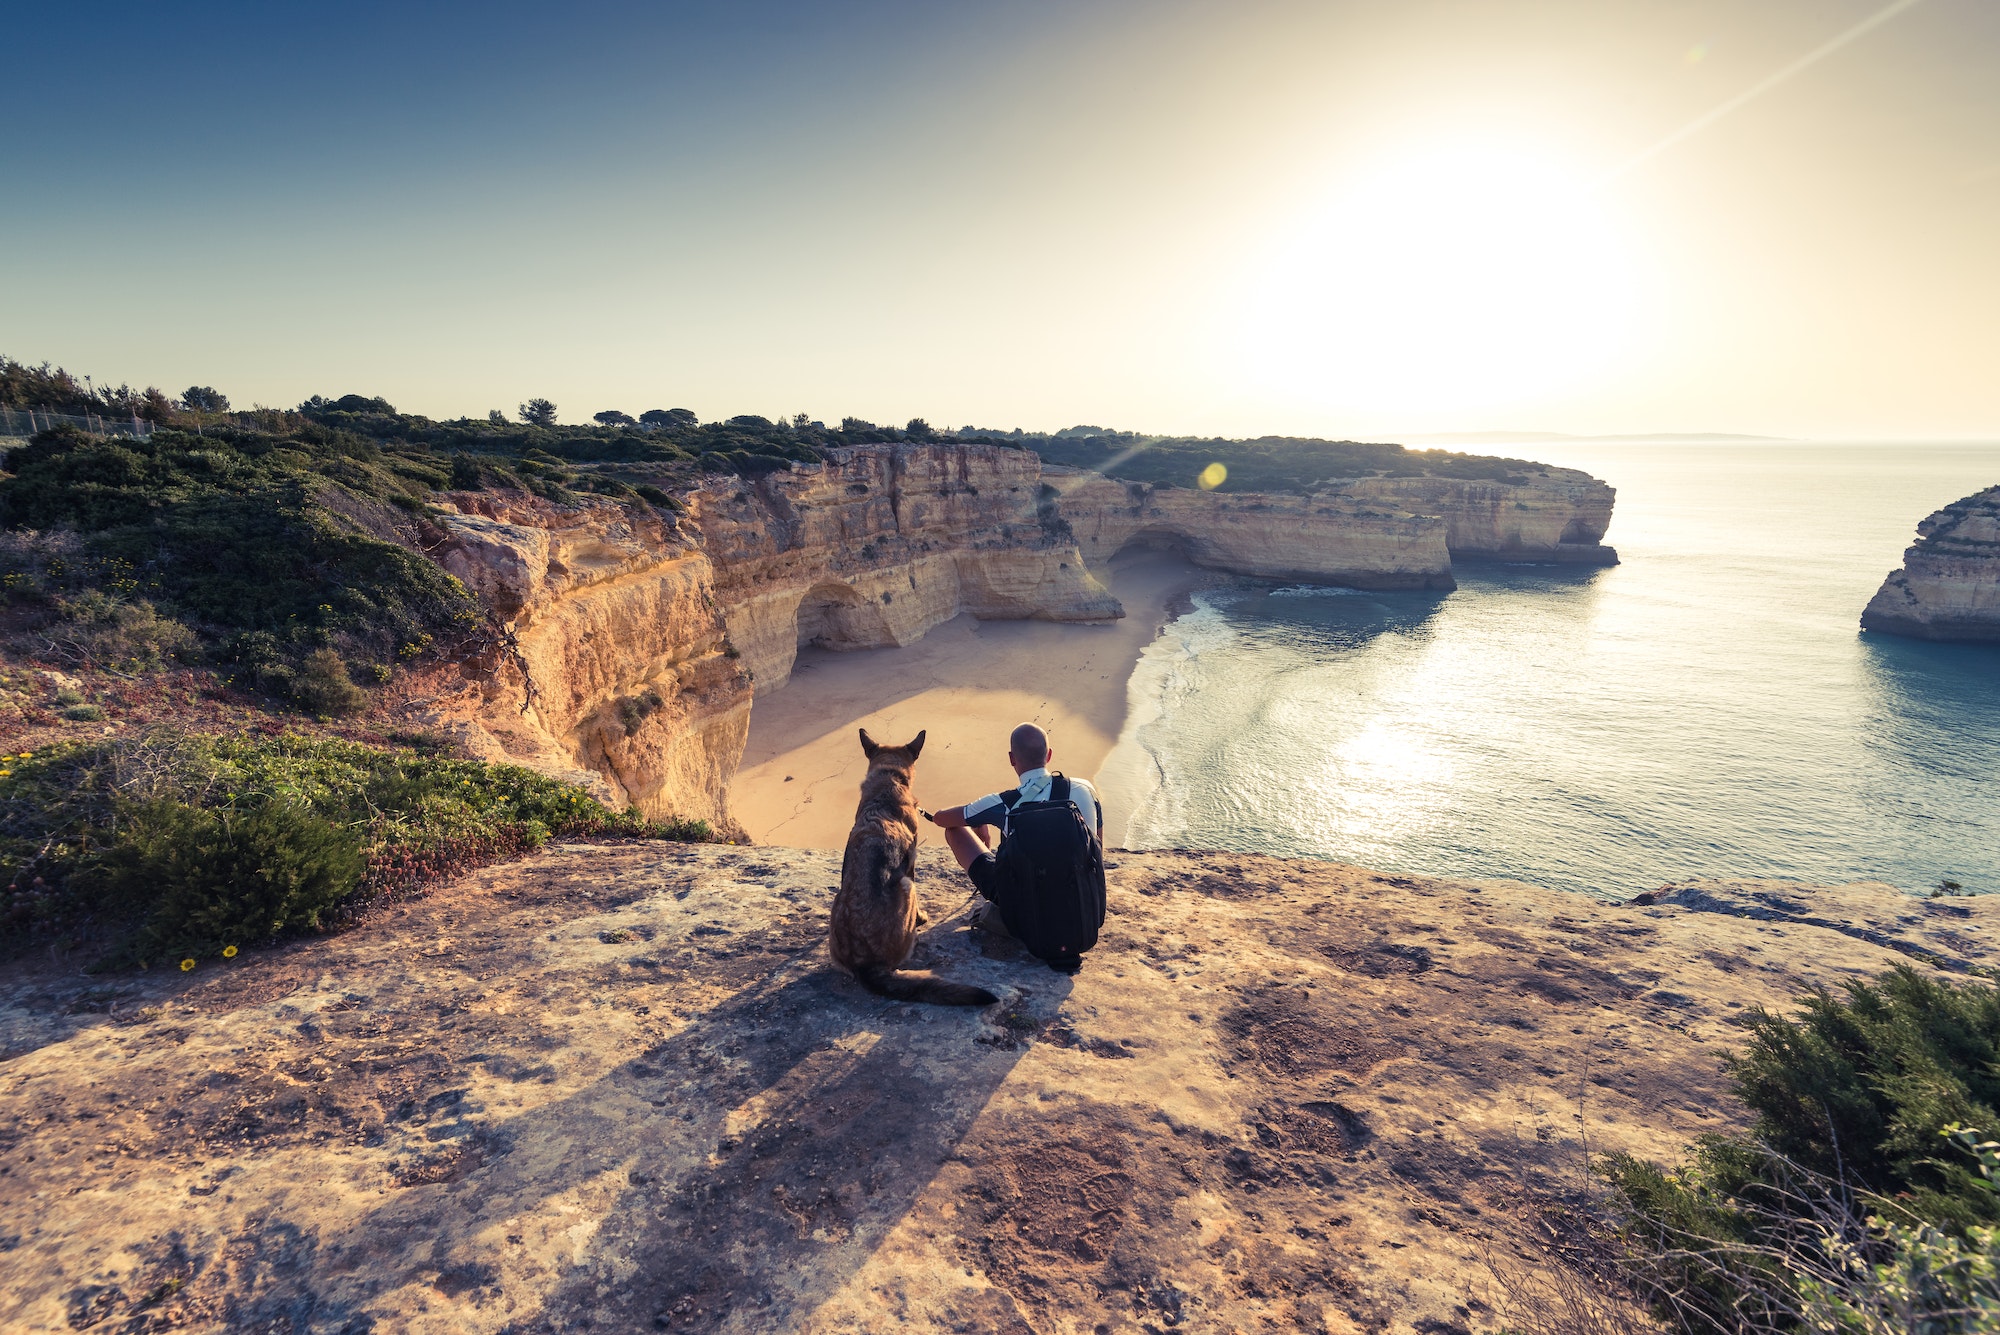 Best friends travellers sitting at cliffs in Portugal